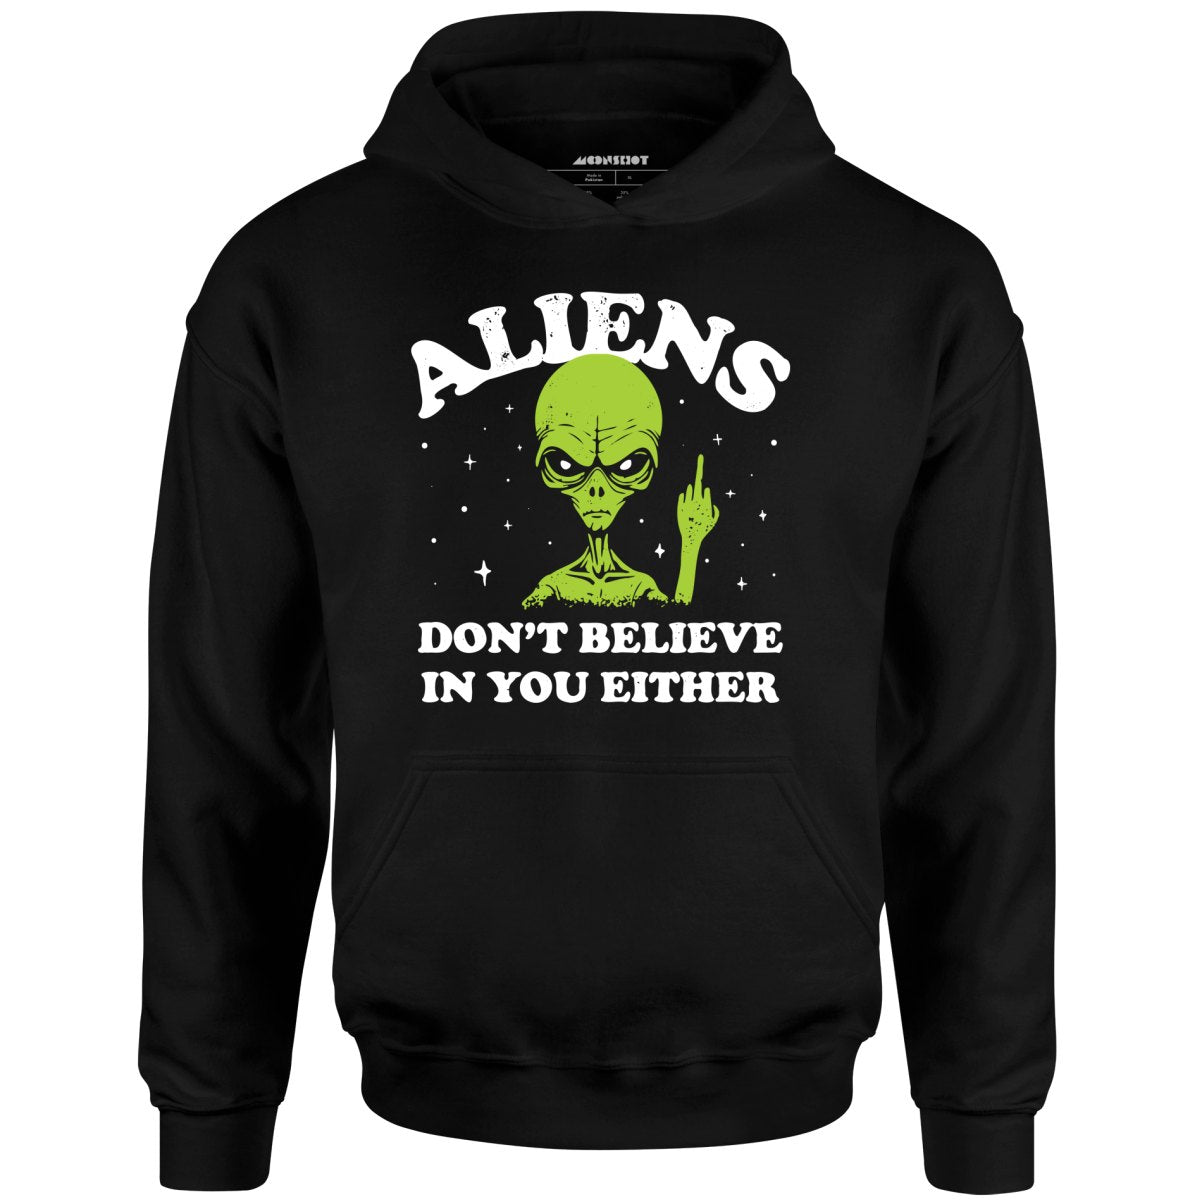 Aliens Don't Believe in You Either - Unisex Hoodie